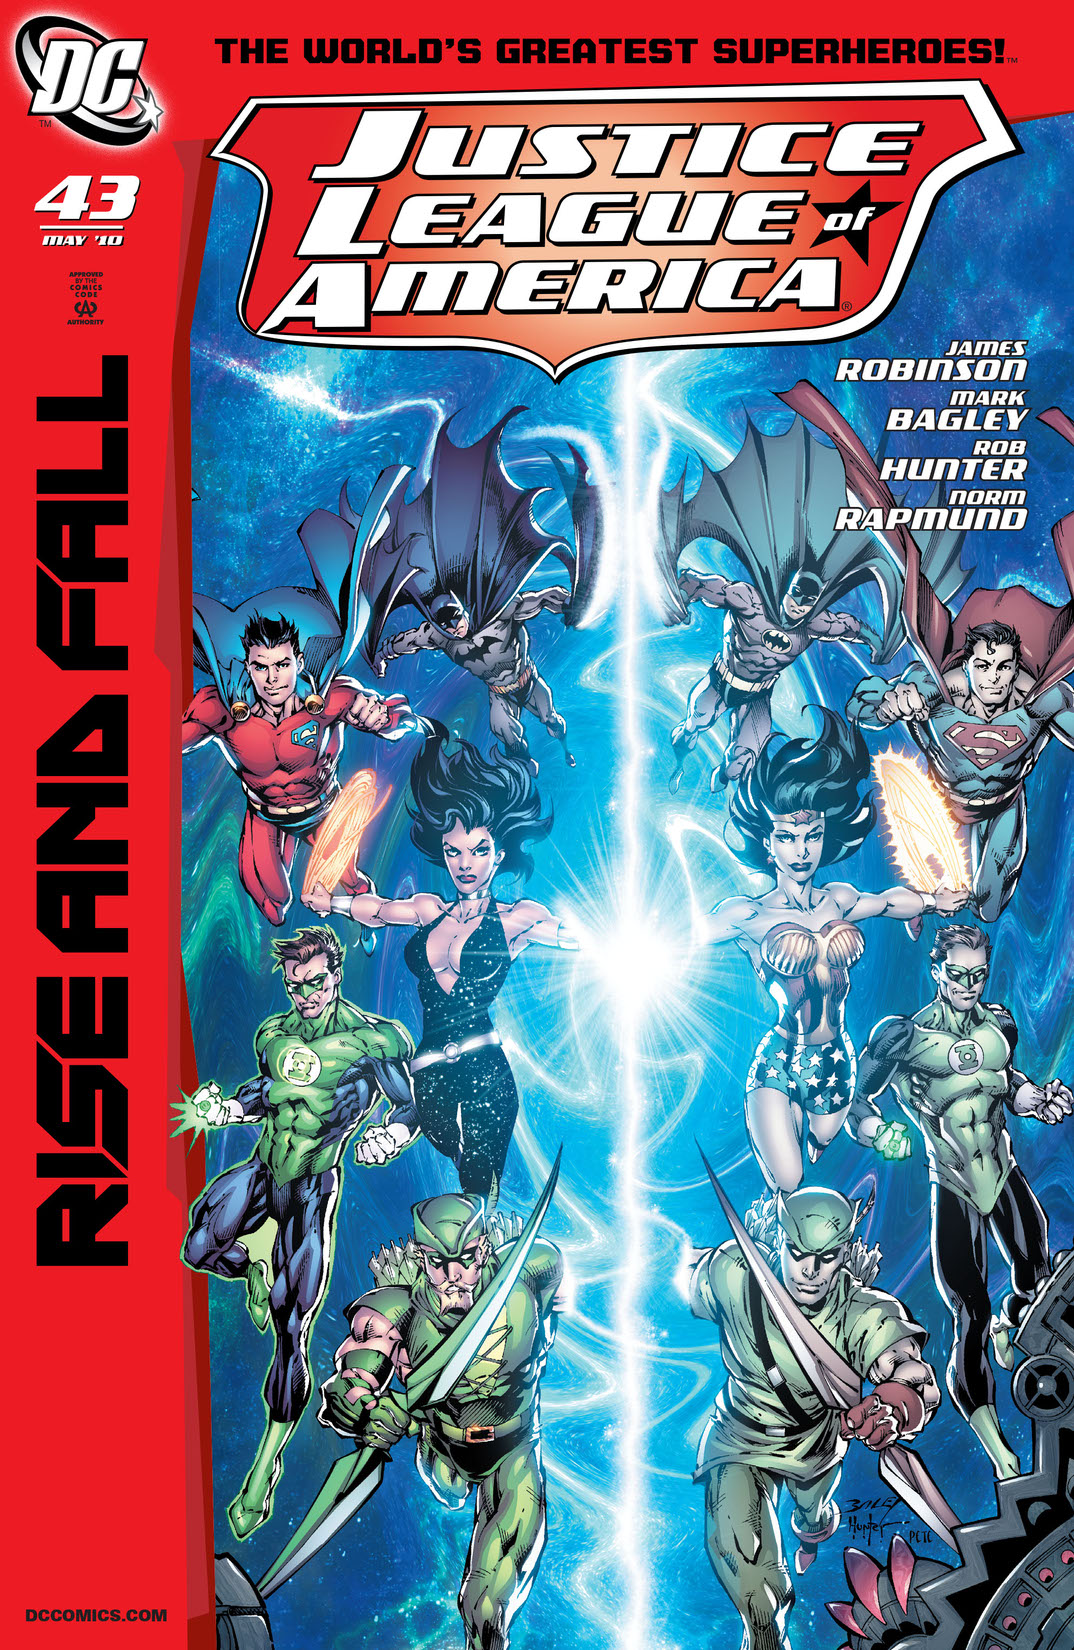 Justice League of America (2006-) #43 preview images